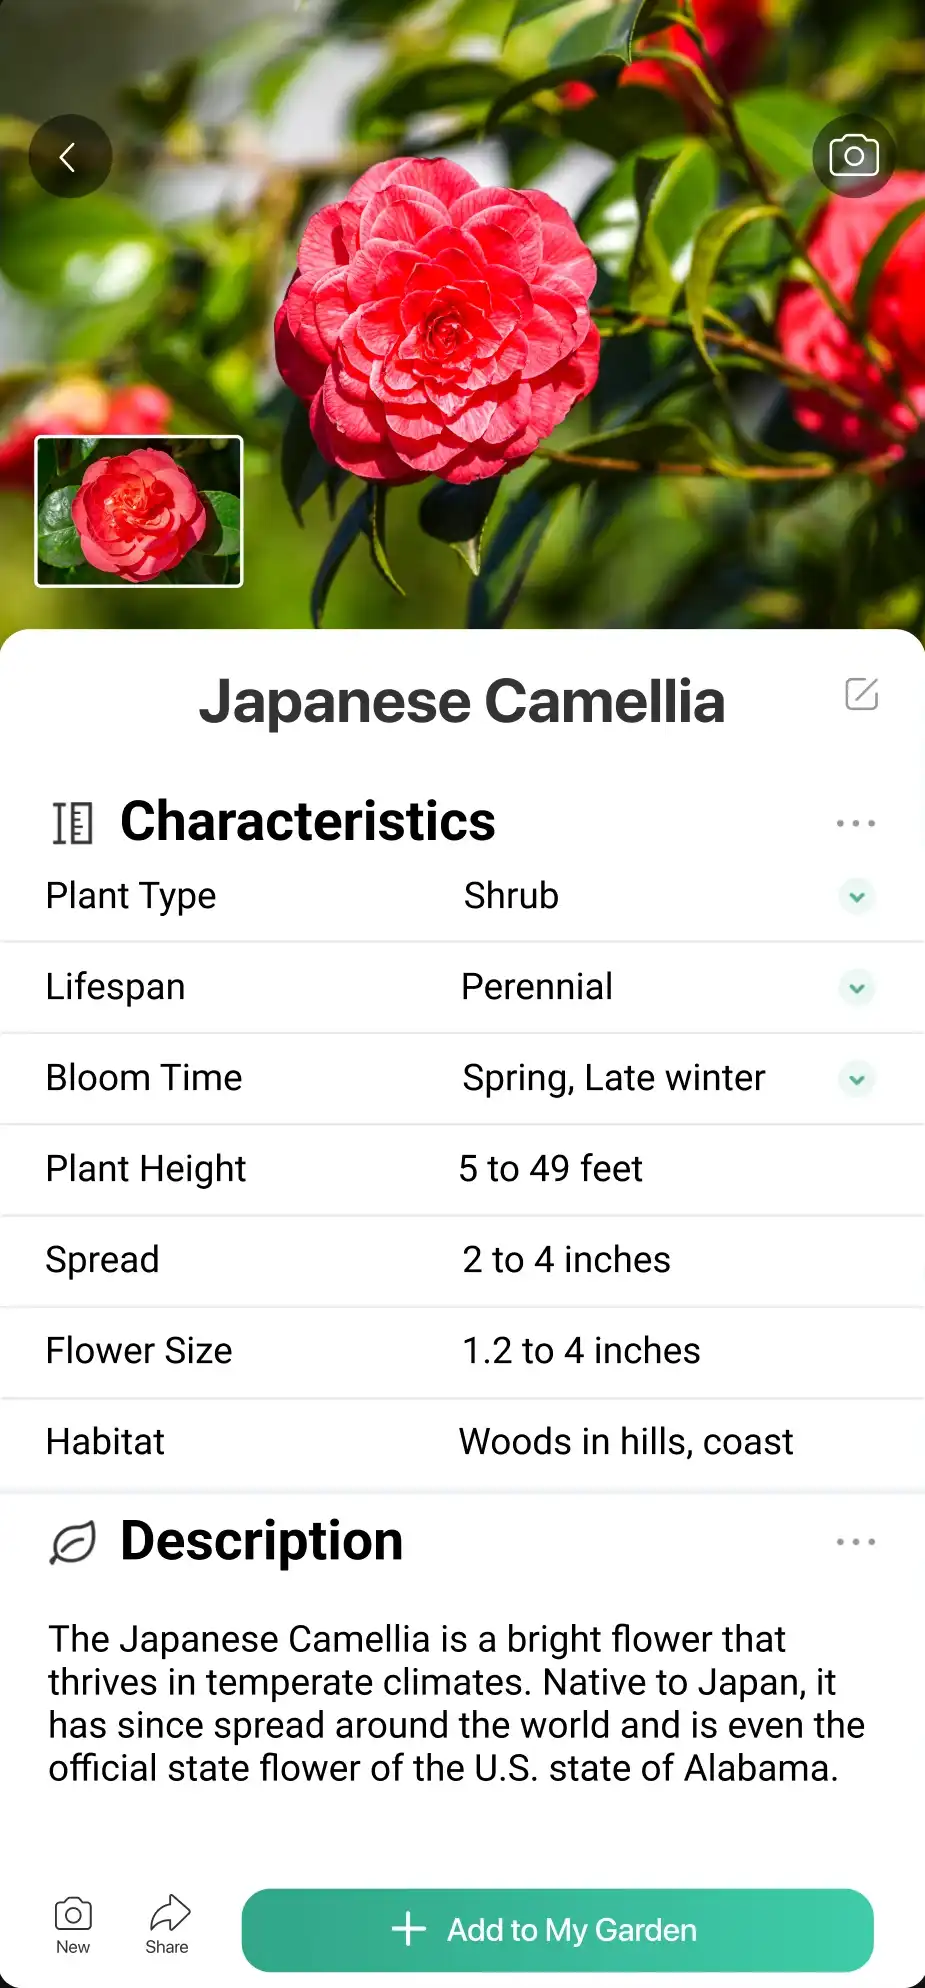 Identifying a rose in the PictureThis app.